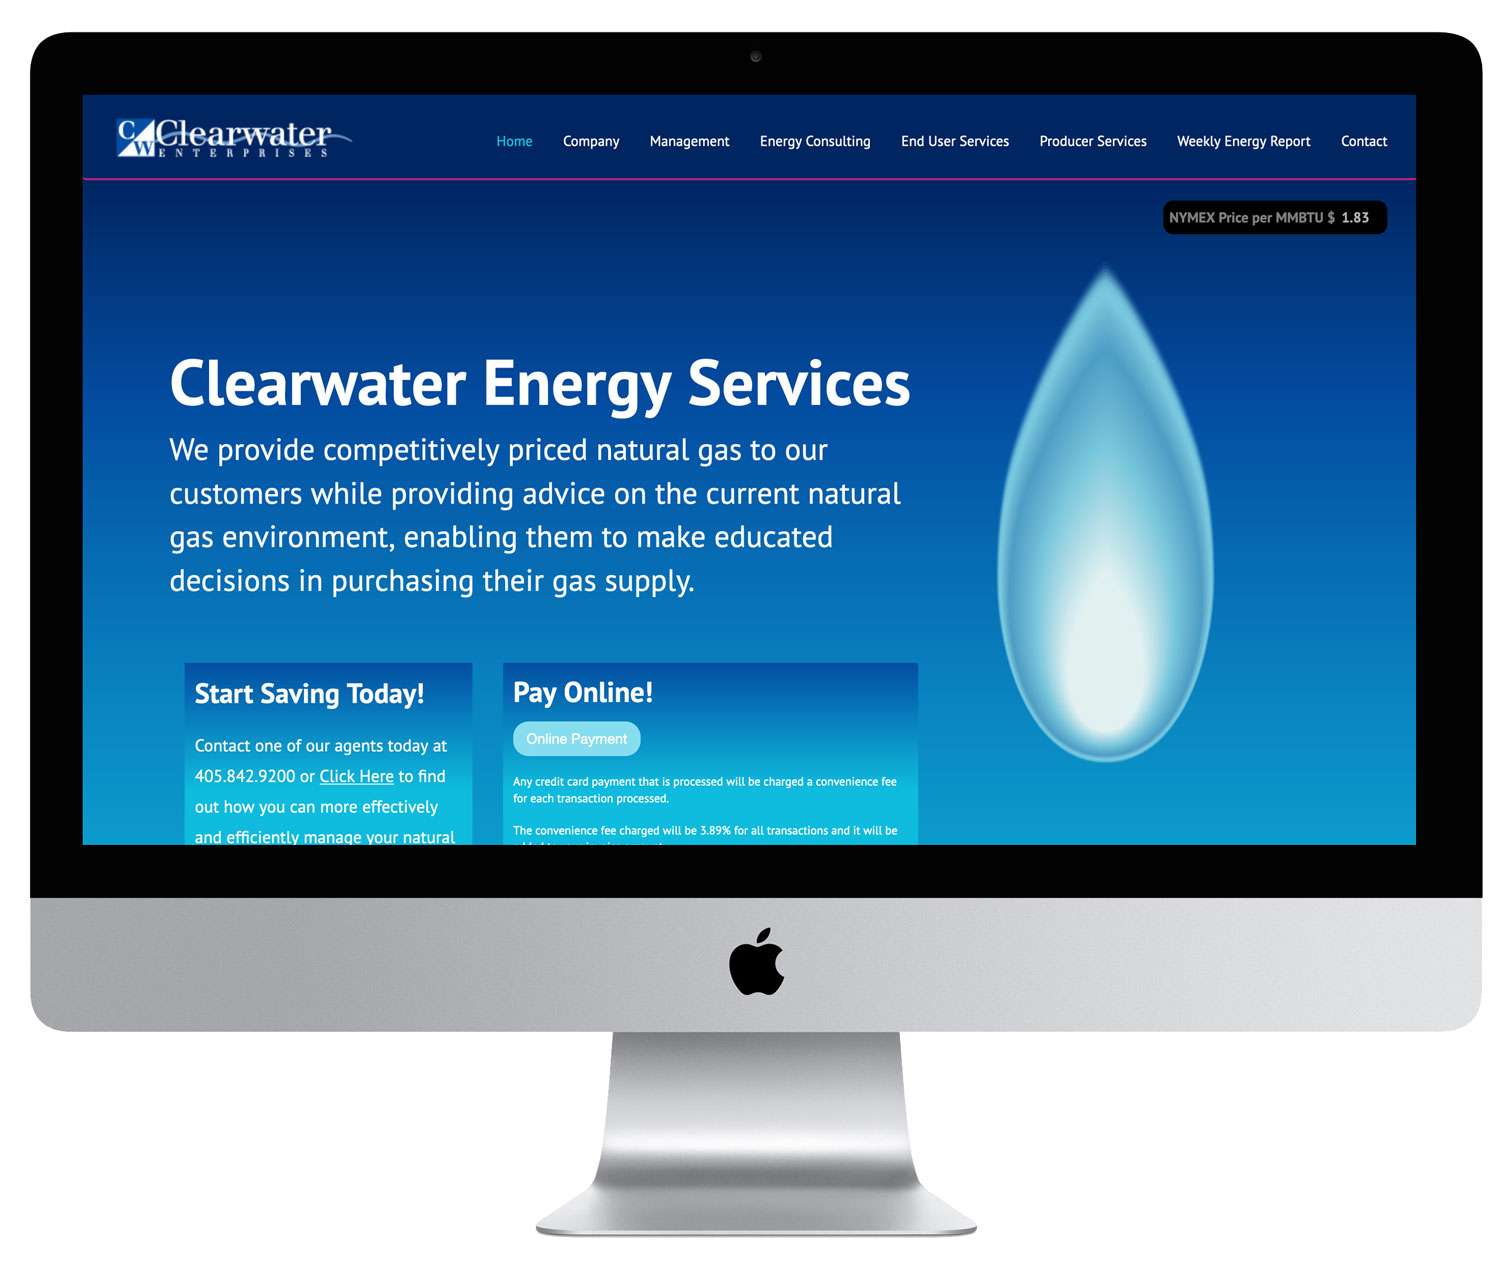 Clearwater Energy Services website